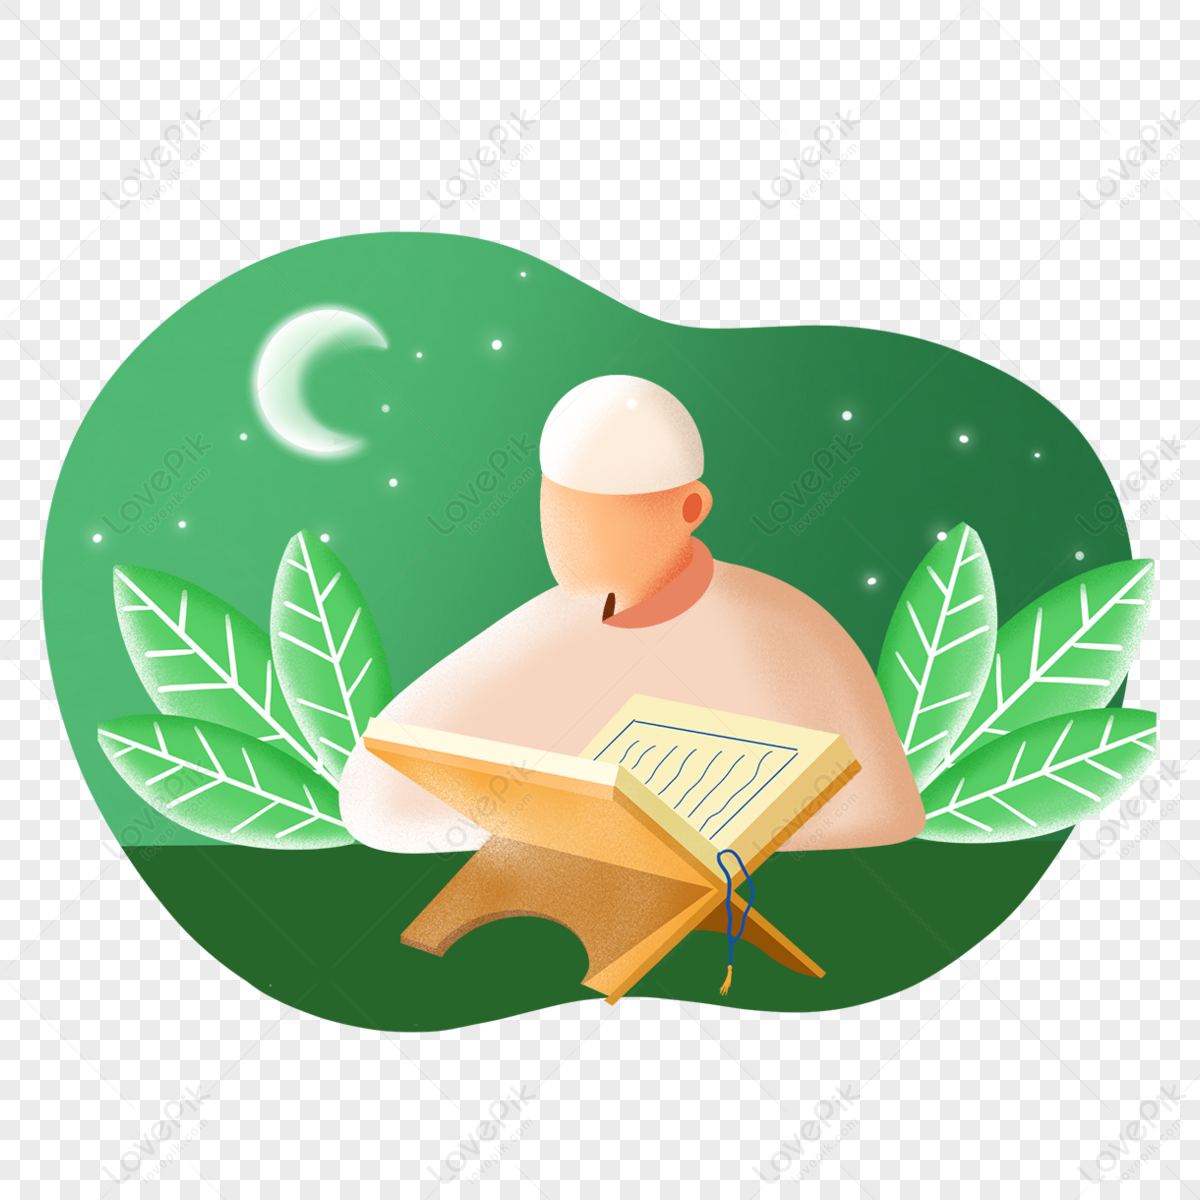 QURAN png images | PNGEgg